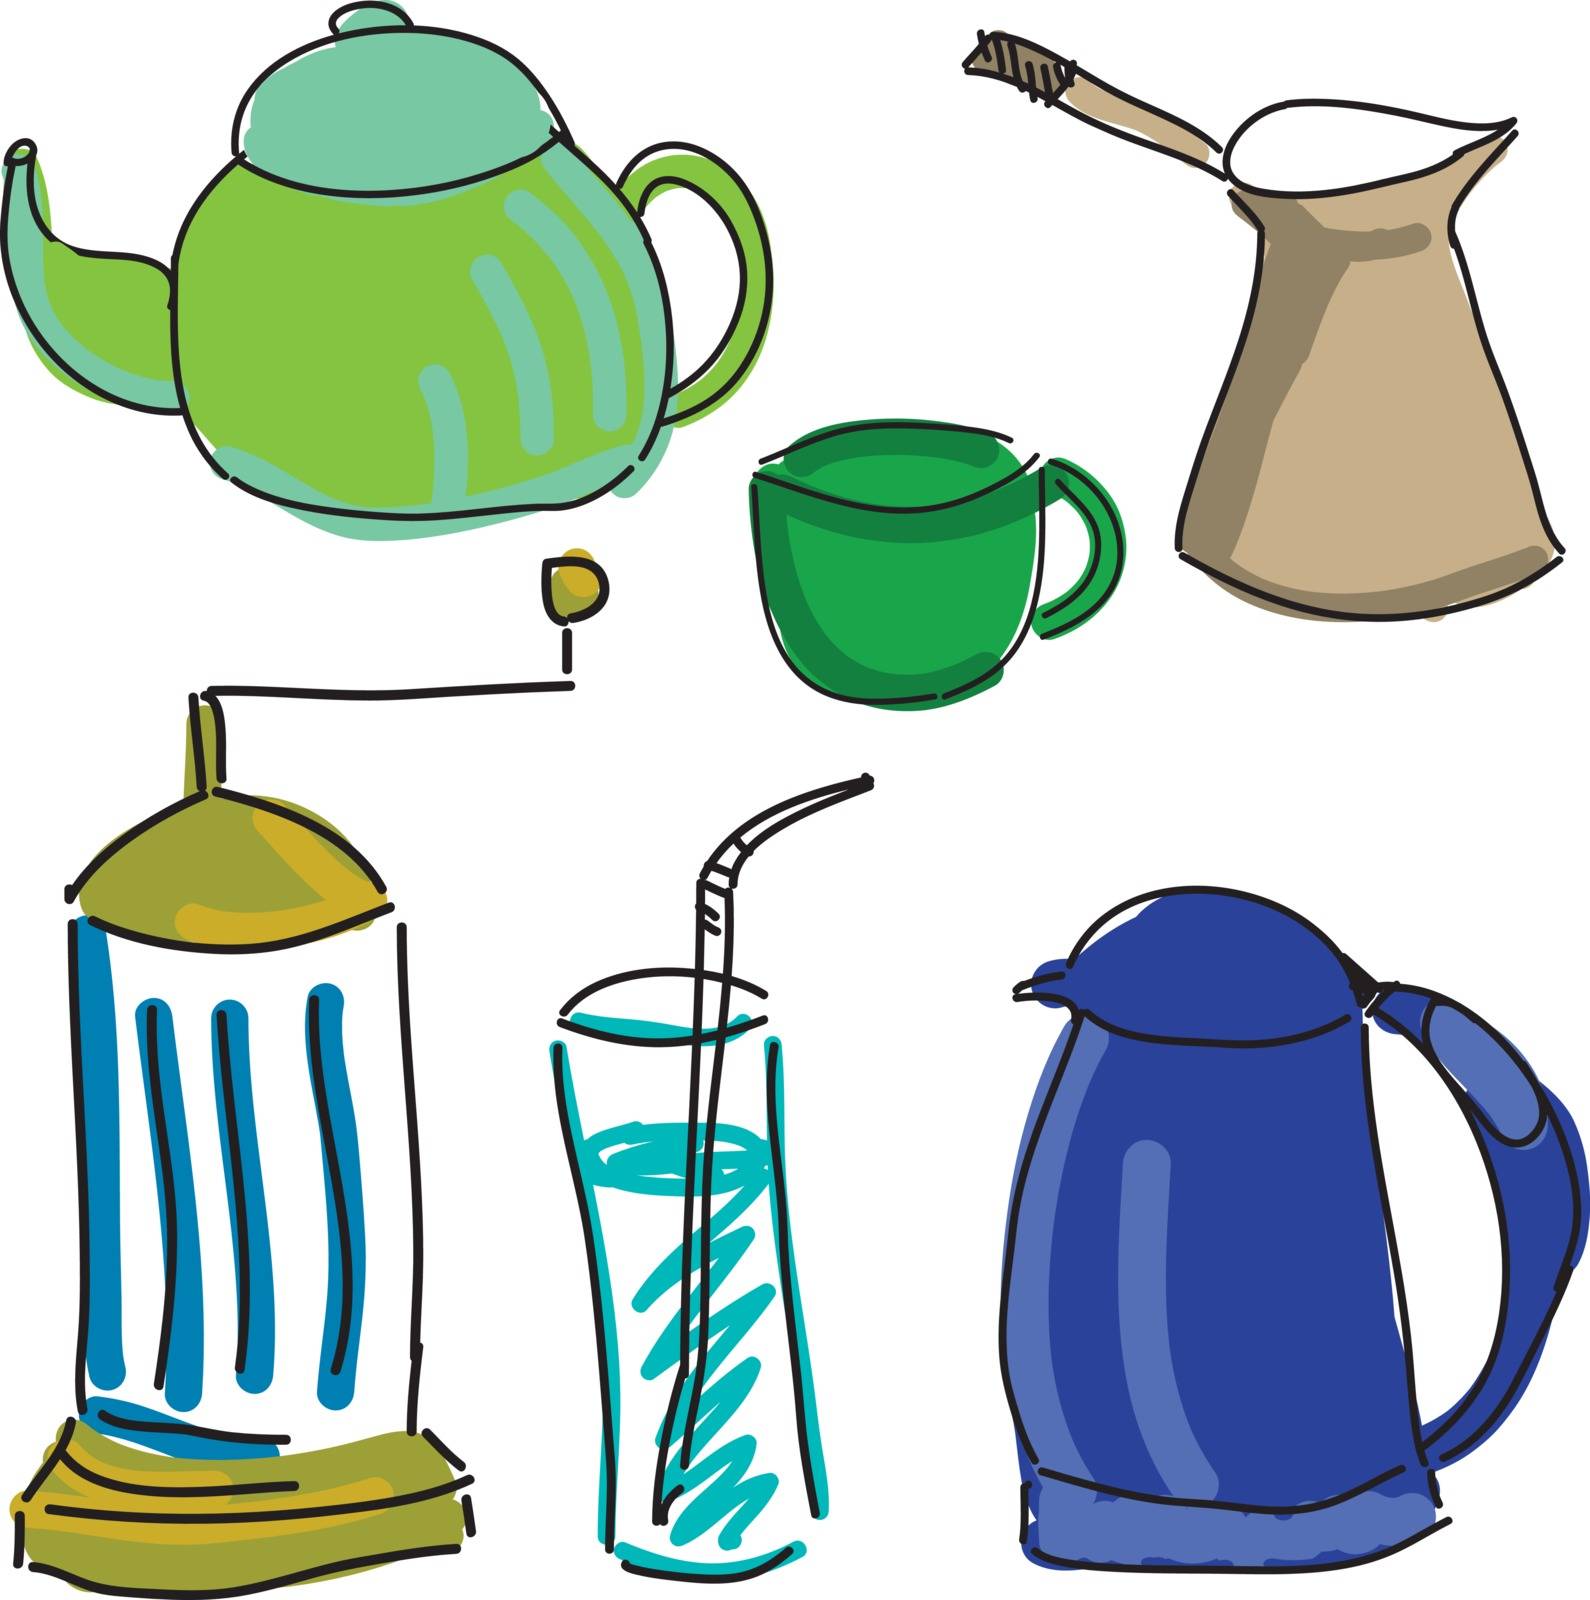 Drawn colored kitchen stuff on white background, close-up view. Vector illustration